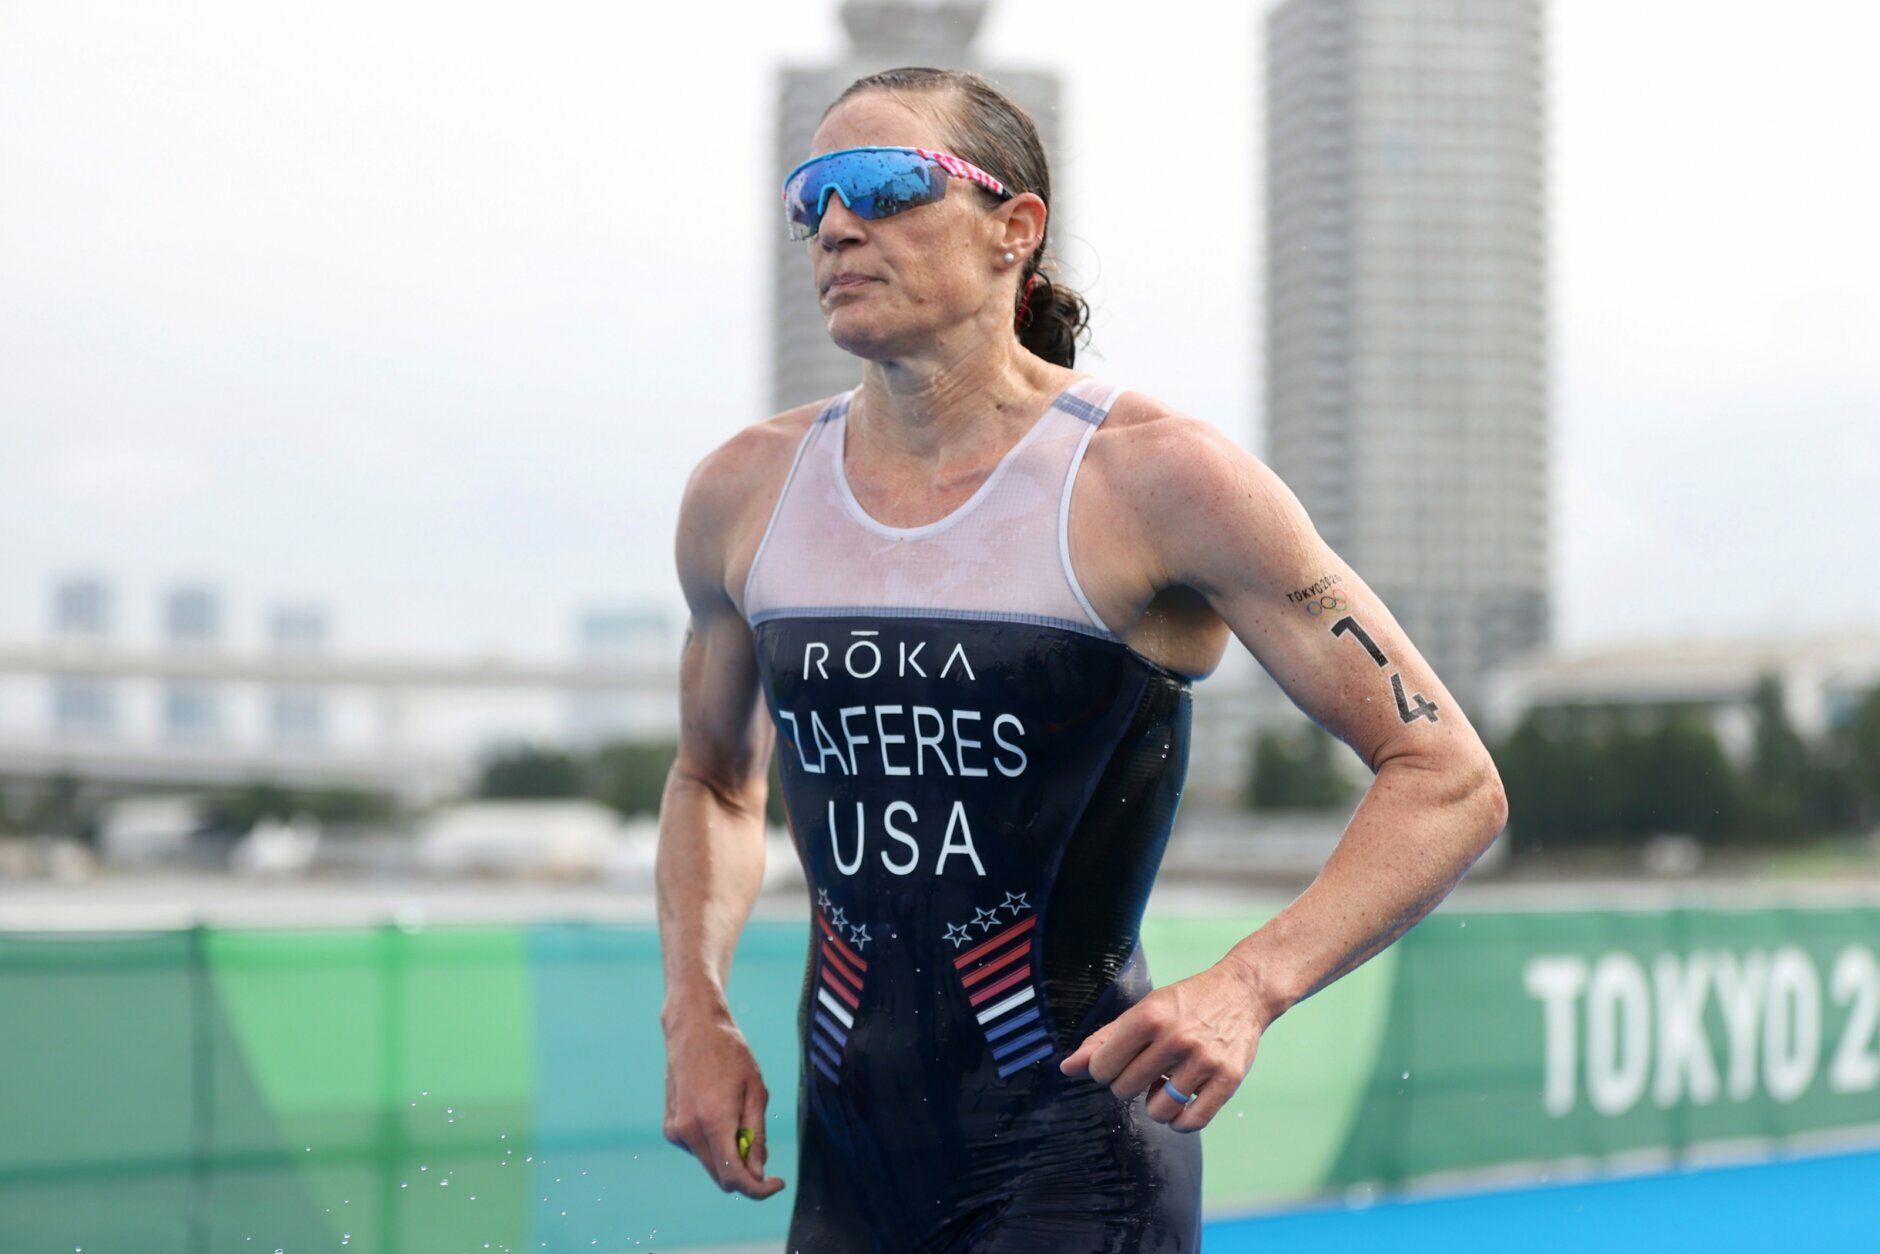 <p><strong>Katie Zaferes (Hampstead, Maryland) — Triathlon</strong></p>
<p><strong>Competition:</strong> Women&#8217;s Triathlon</p>
<p><strong>Result</strong>: Zaferes placed third in the women&#8217;s triathlon to claim the bronze medal, posting a time of 1:57:03.</p>
